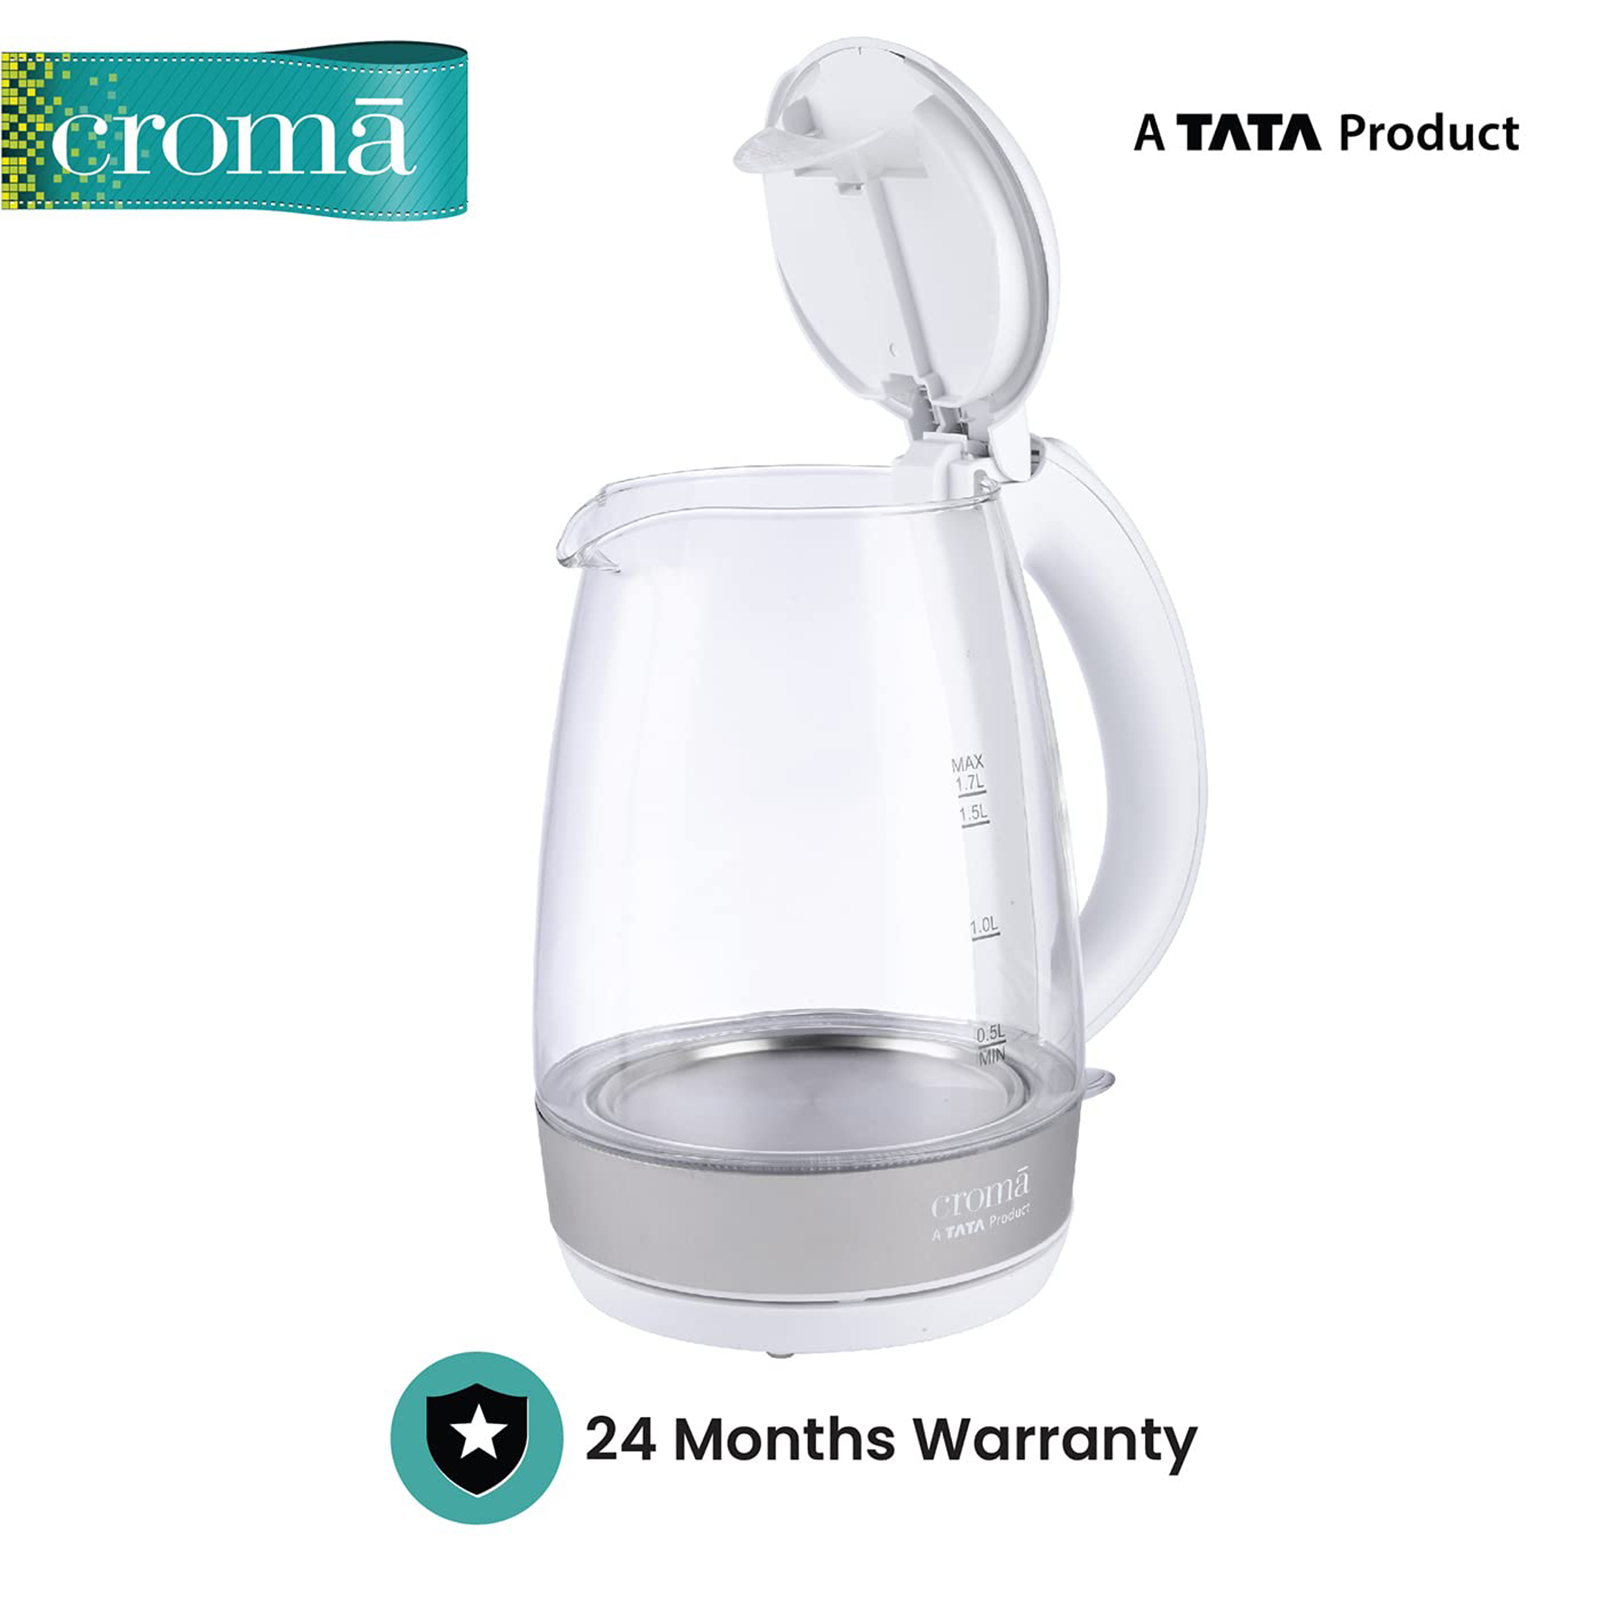 Buy Croma 2200 Watt 1.7 Litre Electric Kettle with Auto Shut Off (White)  Online – Croma